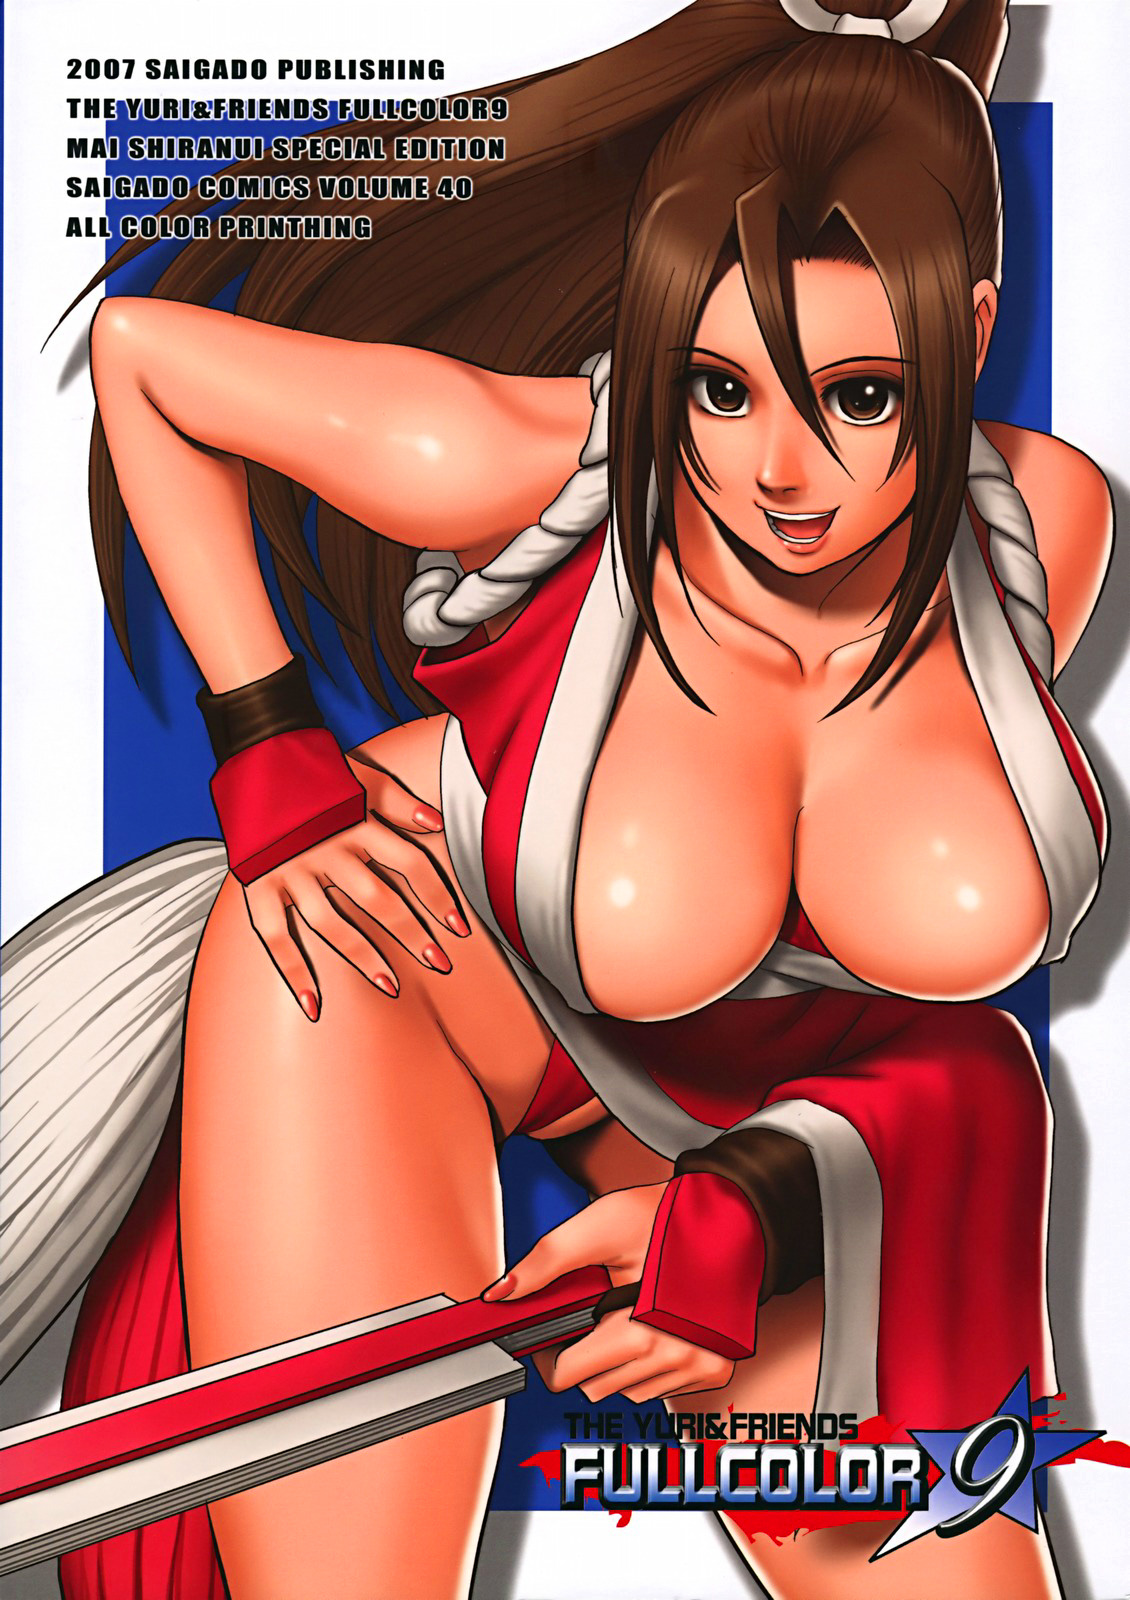 (C72) [Saigado] THE YURI & FRIENDS FULLCOLOR 9 (King of Fighters) [Decensored] page 30 full